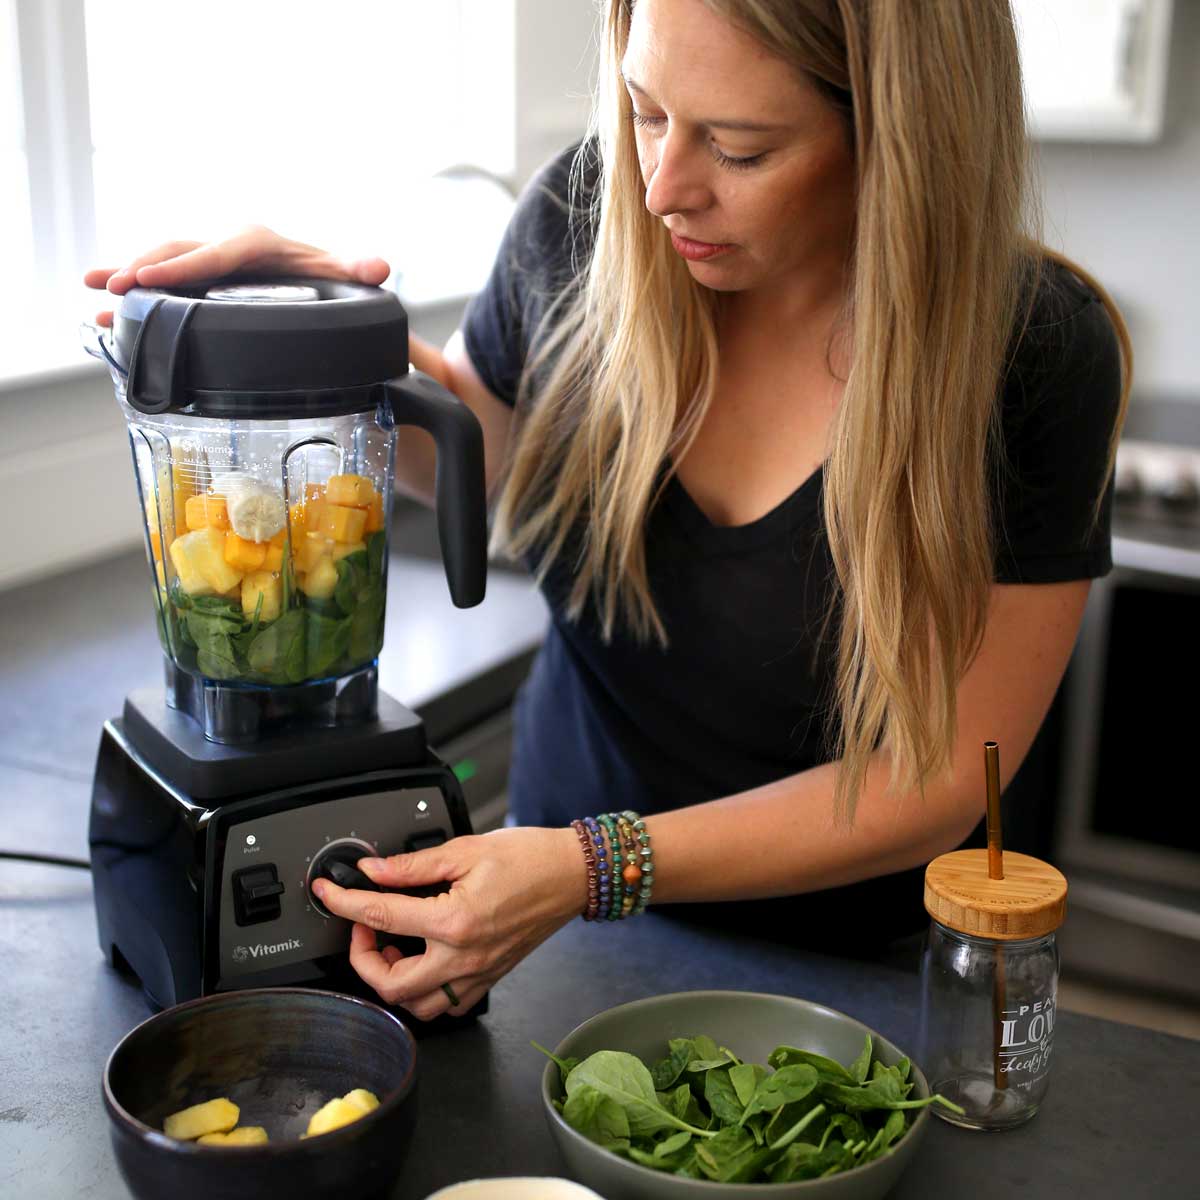 Annual Vitamix Days sale offers up to 50% off its pro blenders